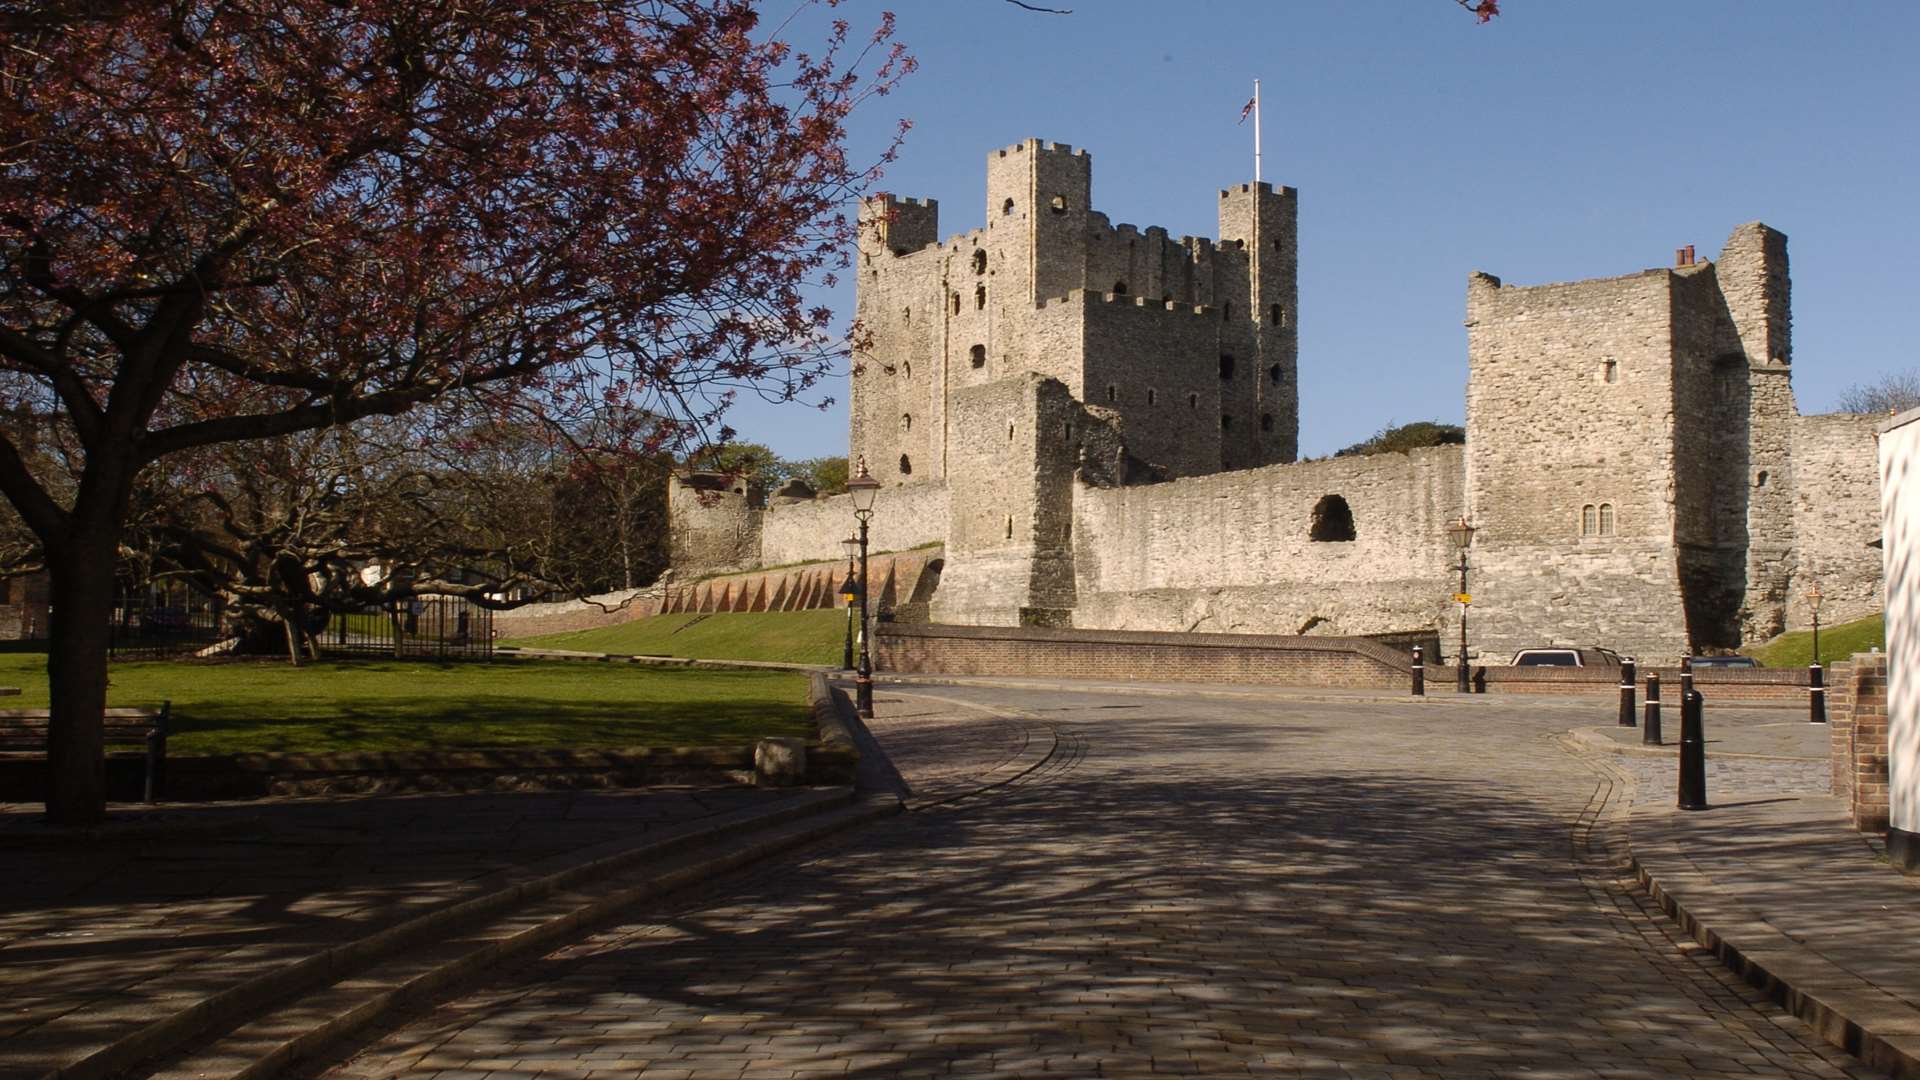 Rochester's stunning and historic castle